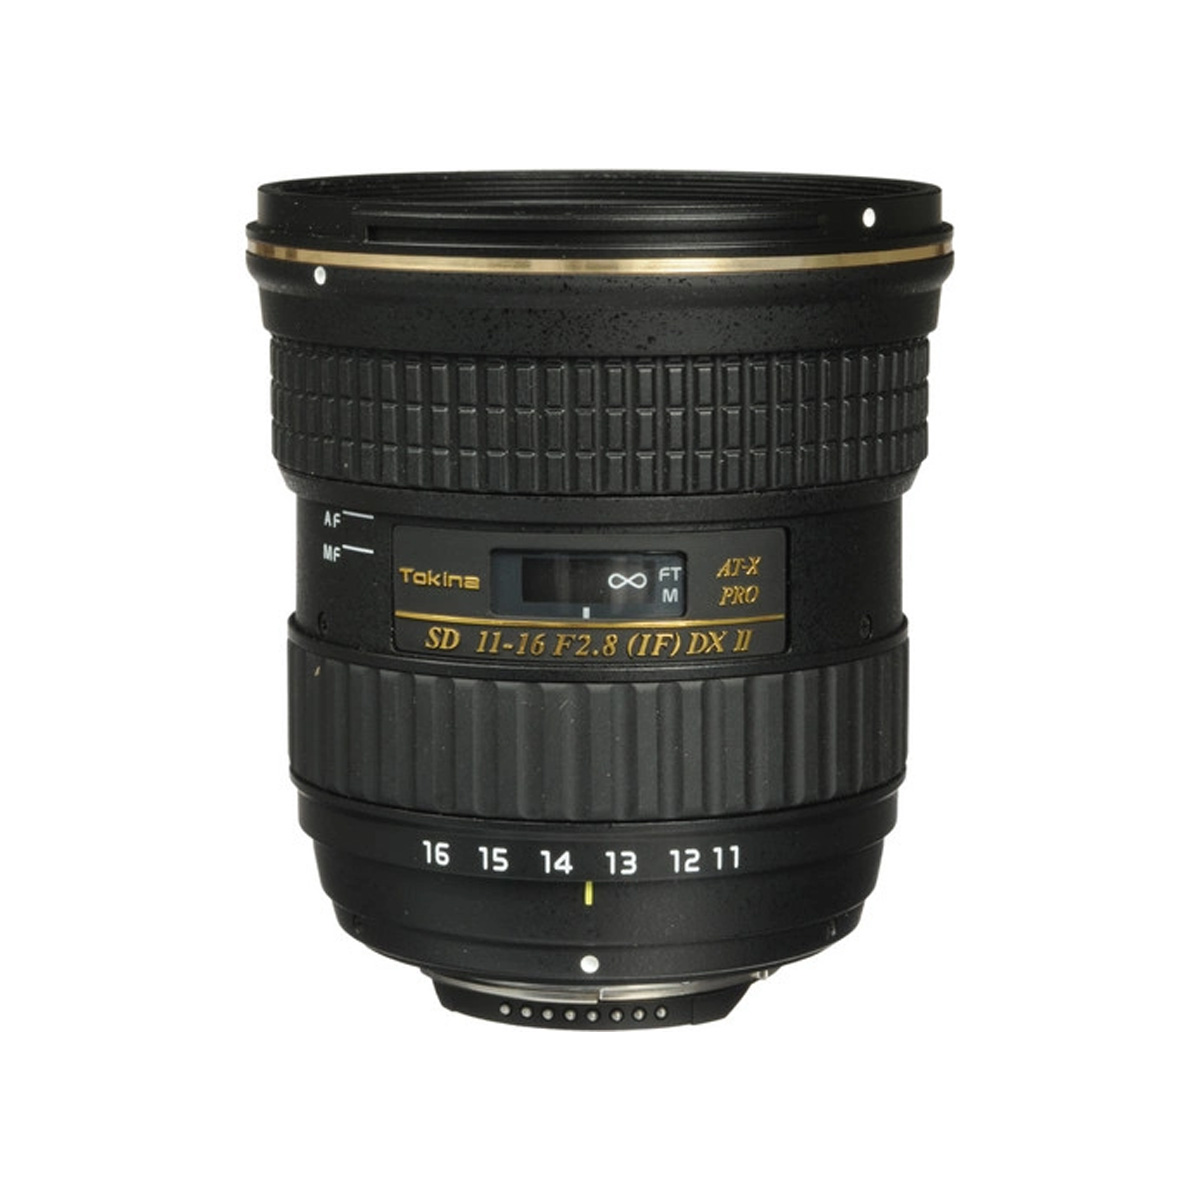 Tokina AT-X 116 PRO DX-II 11-16mm f/2.8 Lens for Nikon F - The